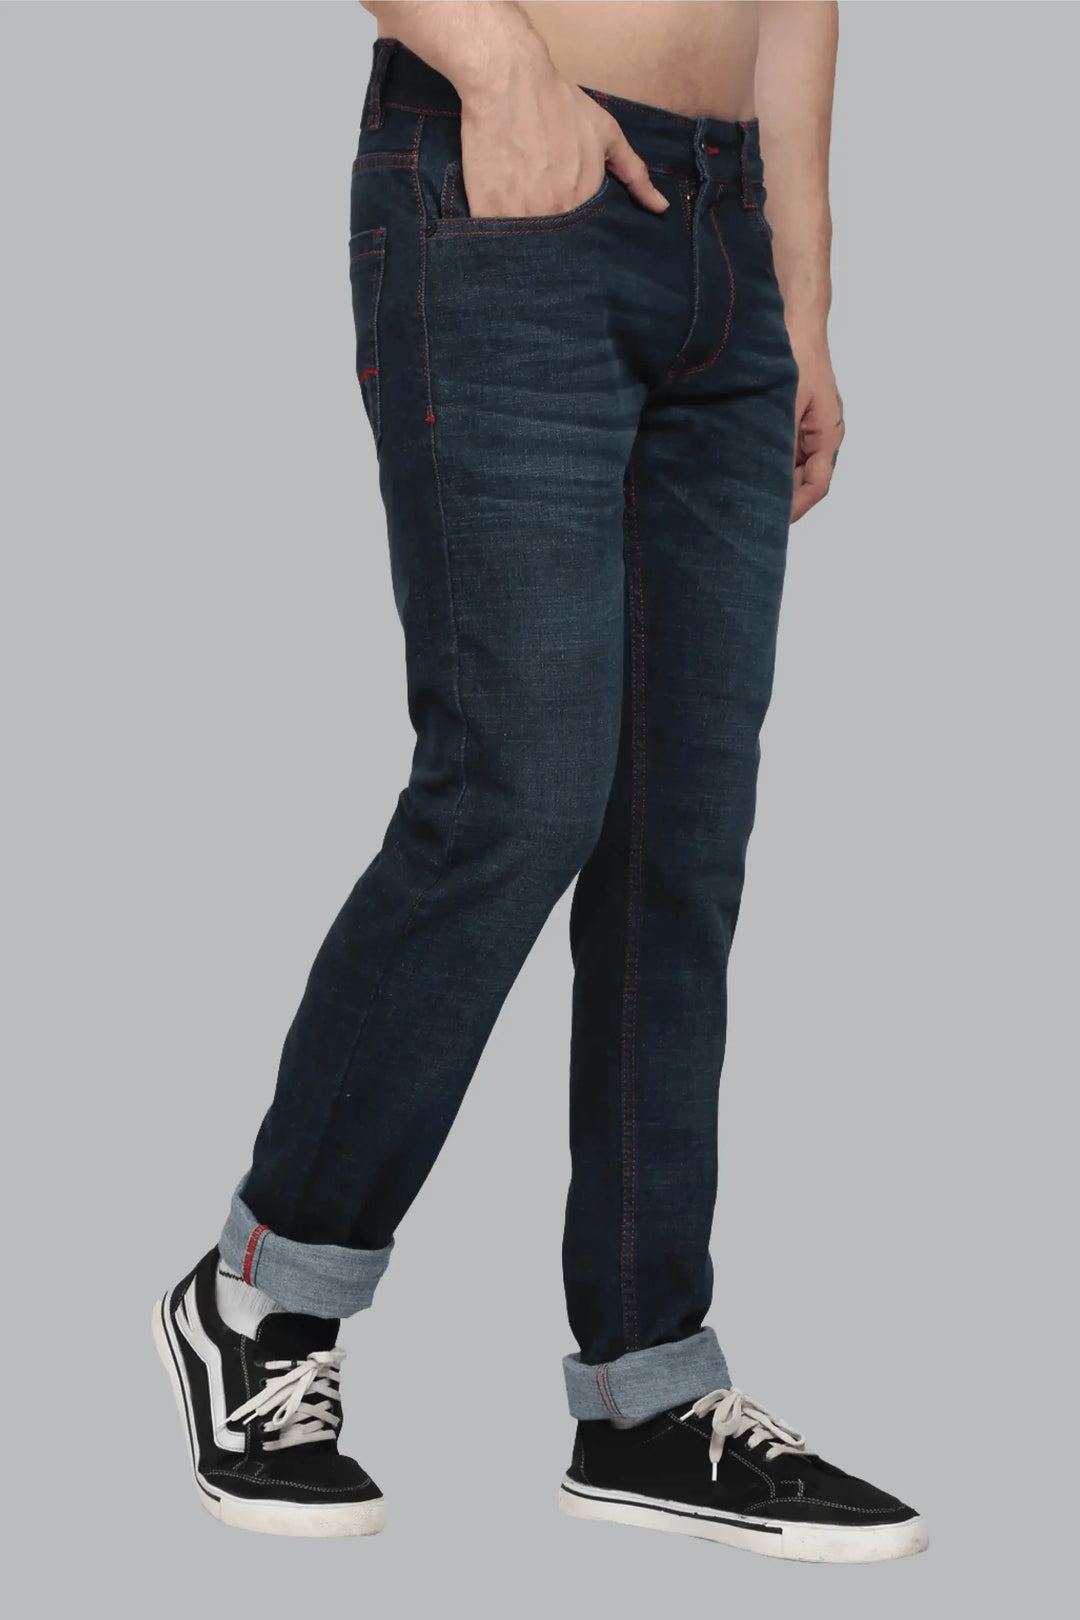 The Relaxed-fit denim jeans are made of high-quality premium fabric which gives you a very premium look and comfort in wear if you are looking comfort with quality then this denim jeans is made for you